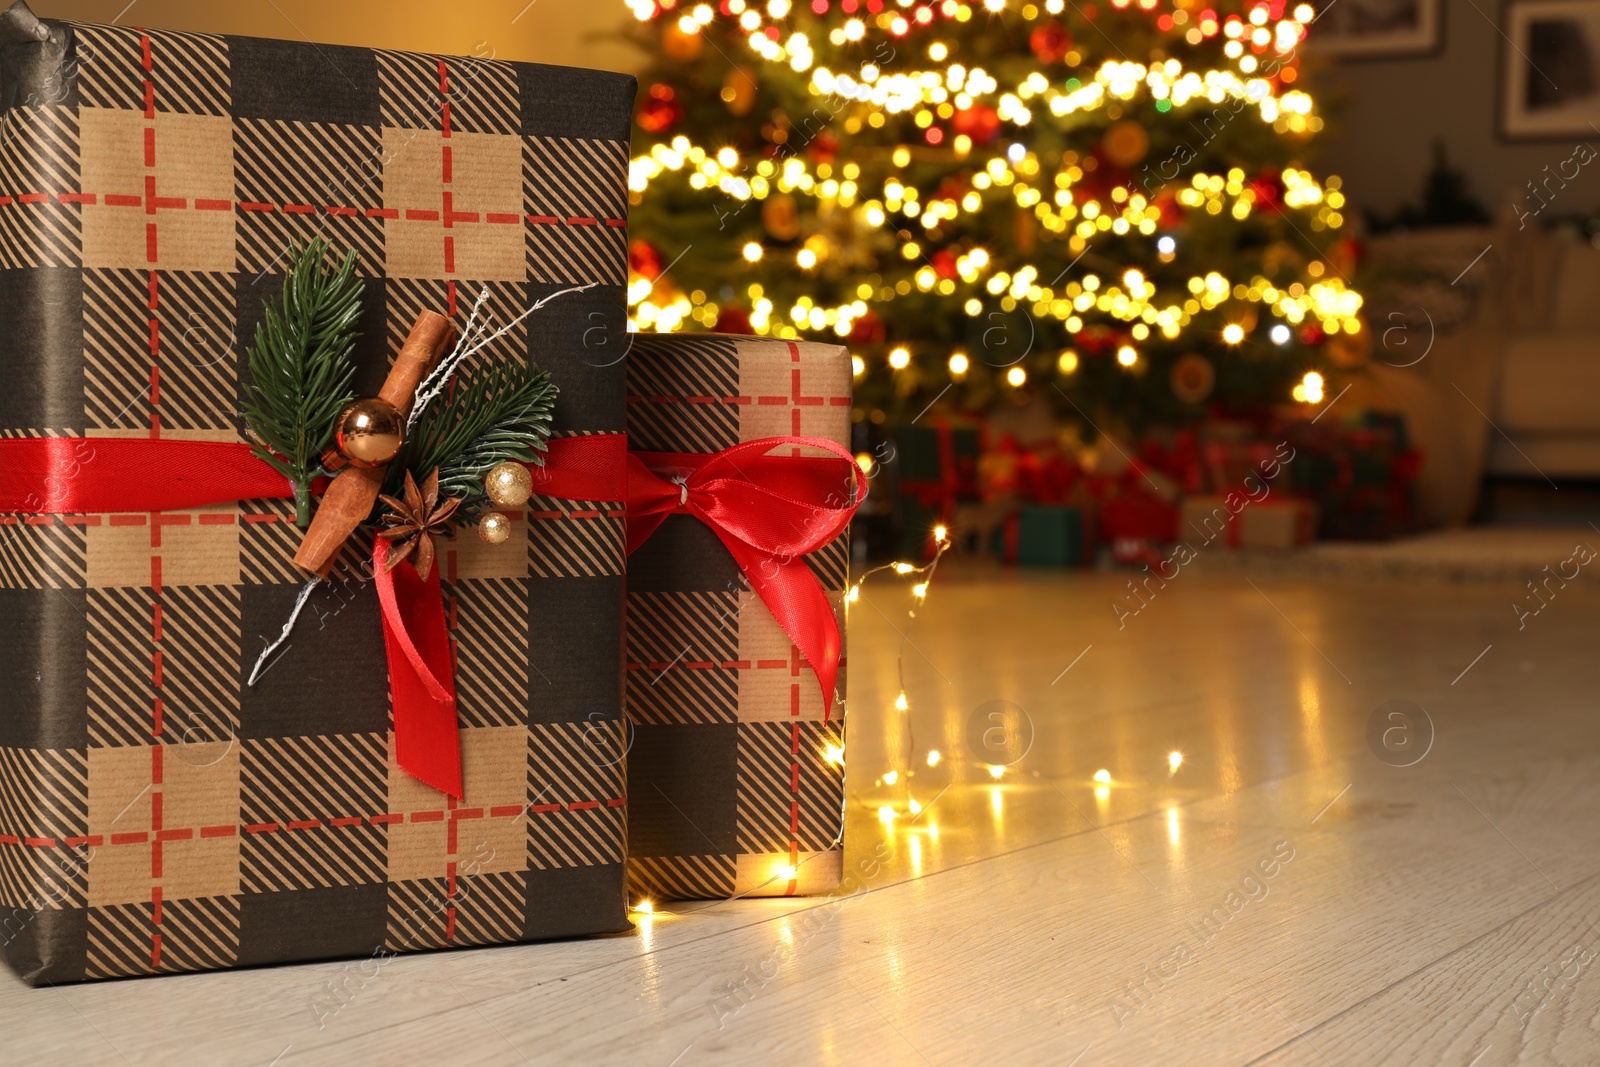 Photo of Beautiful gift boxes against fir tree with Christmas lights indoors, space for text